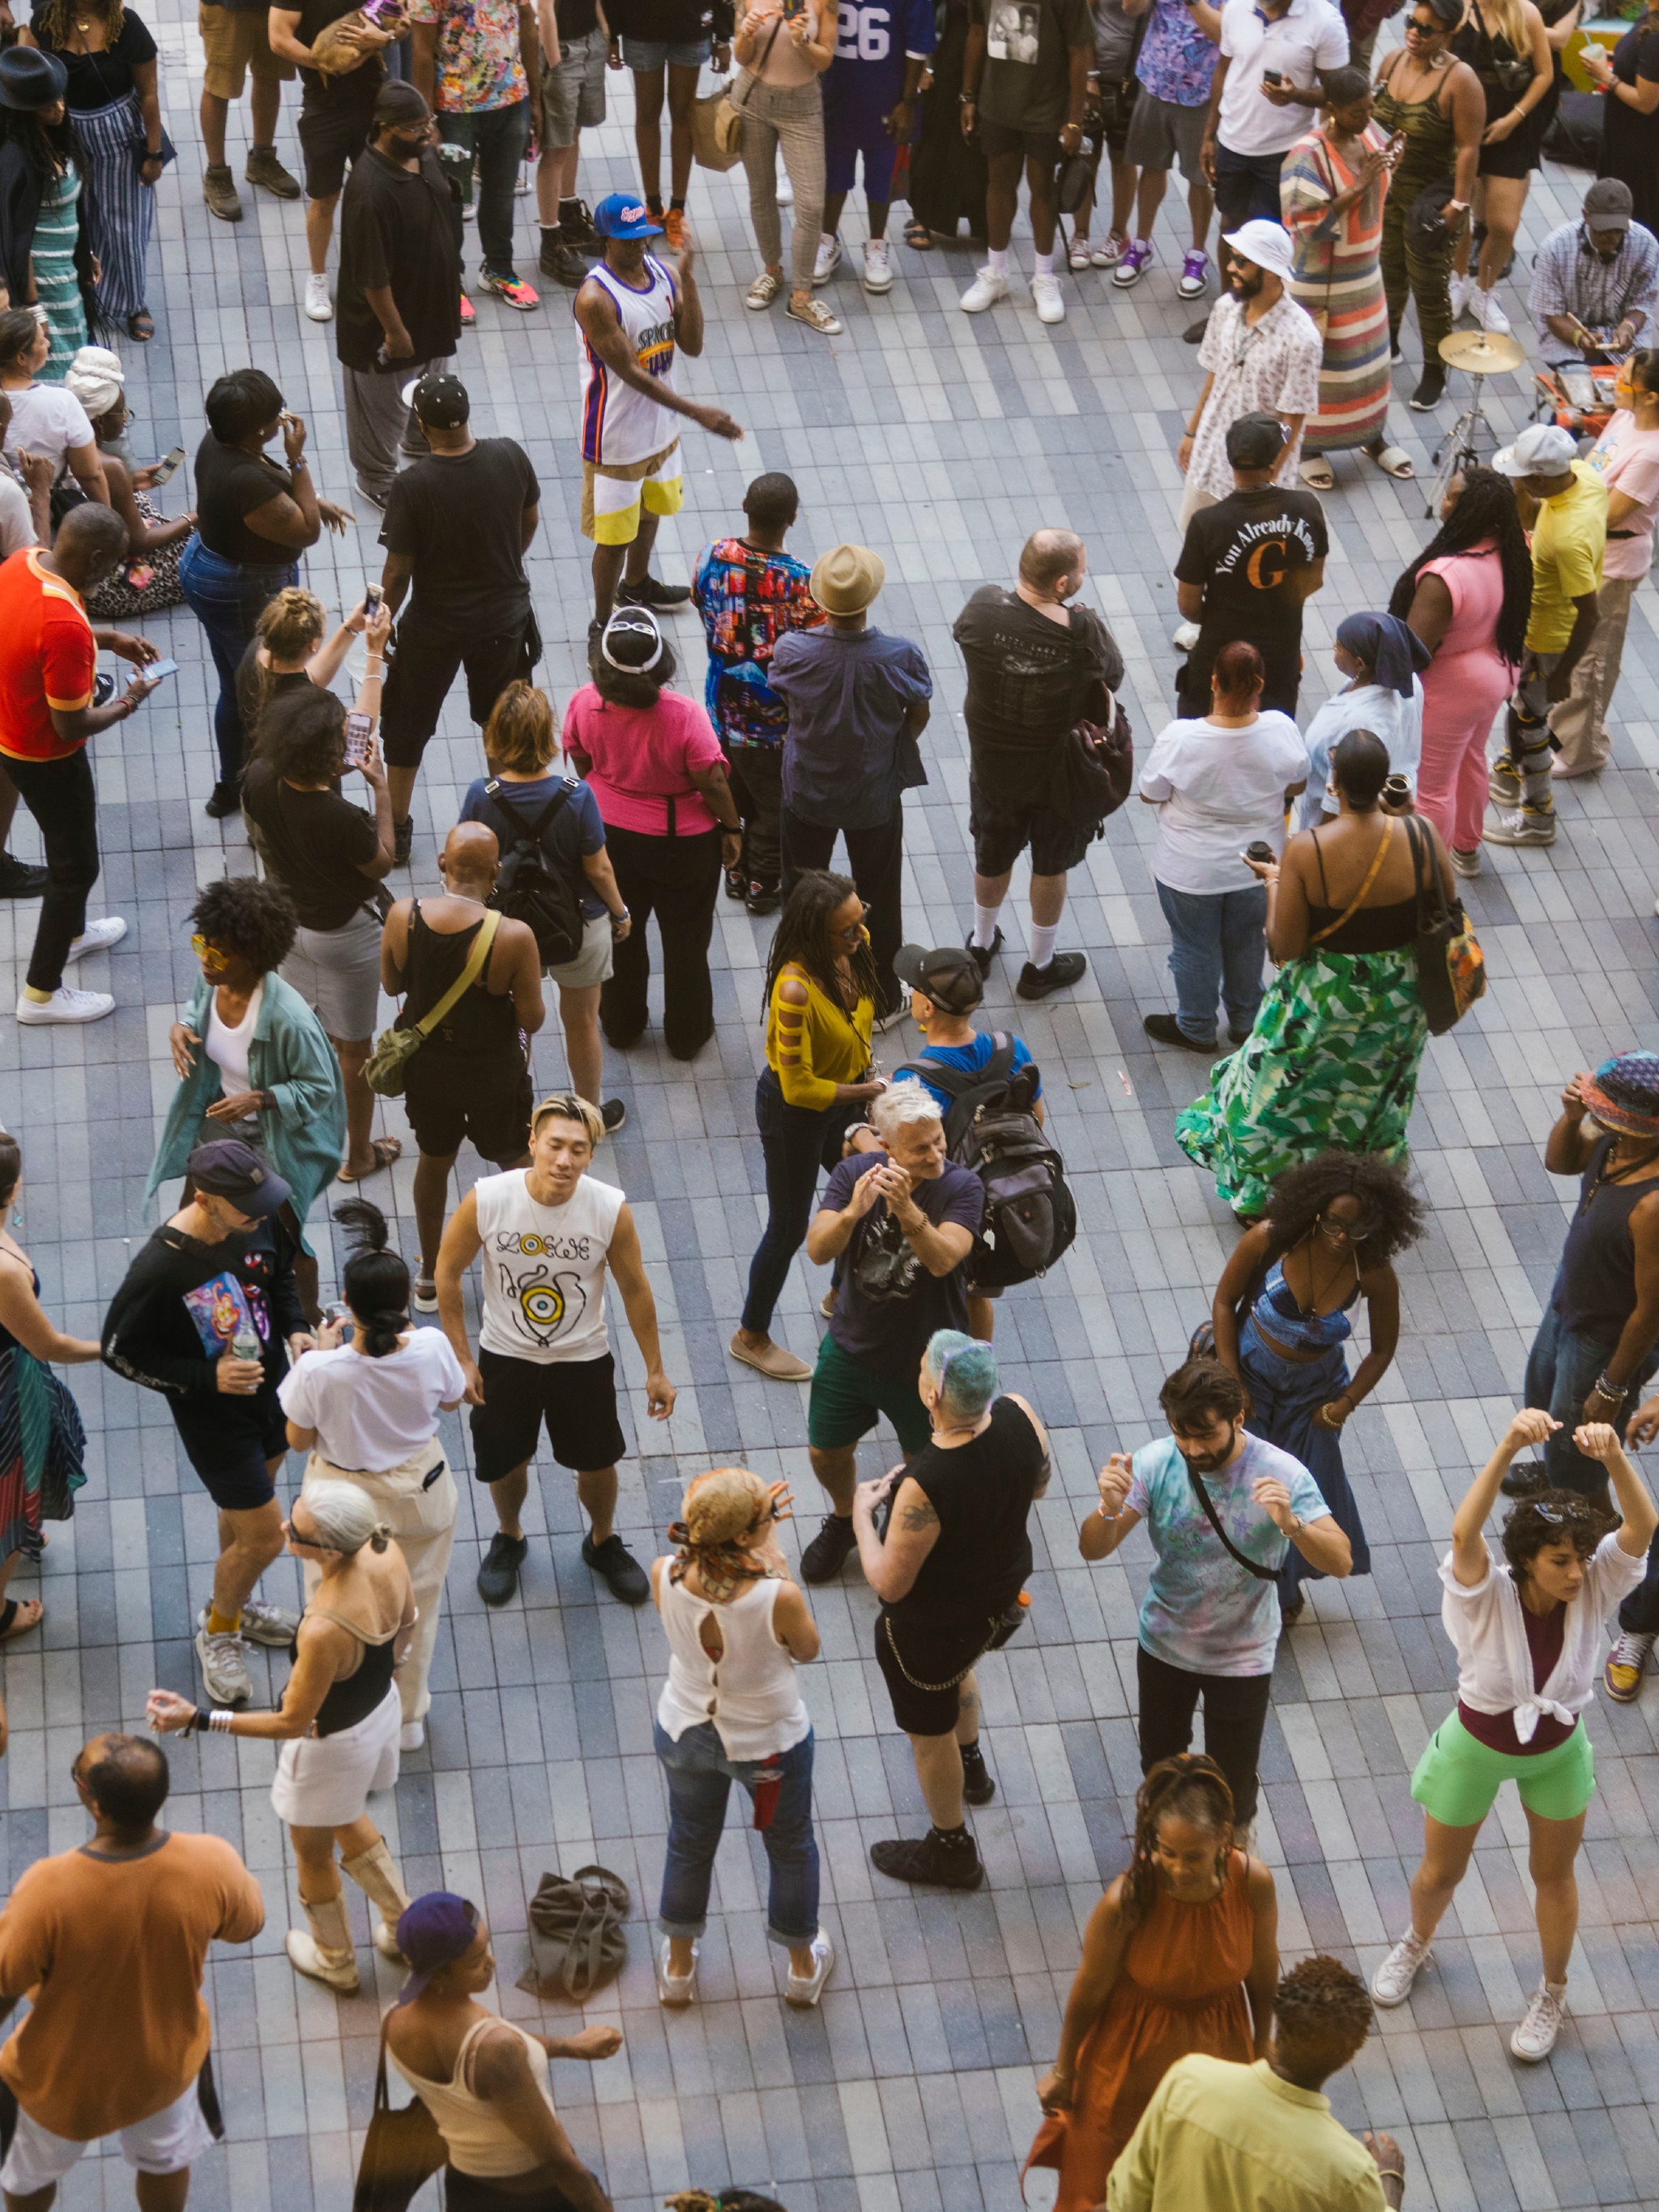 A crowd is seen from above on an outdoor patio with gray paving stones. People are dressed in colorful tshirts and are dancing. One audience member looks up at us. 